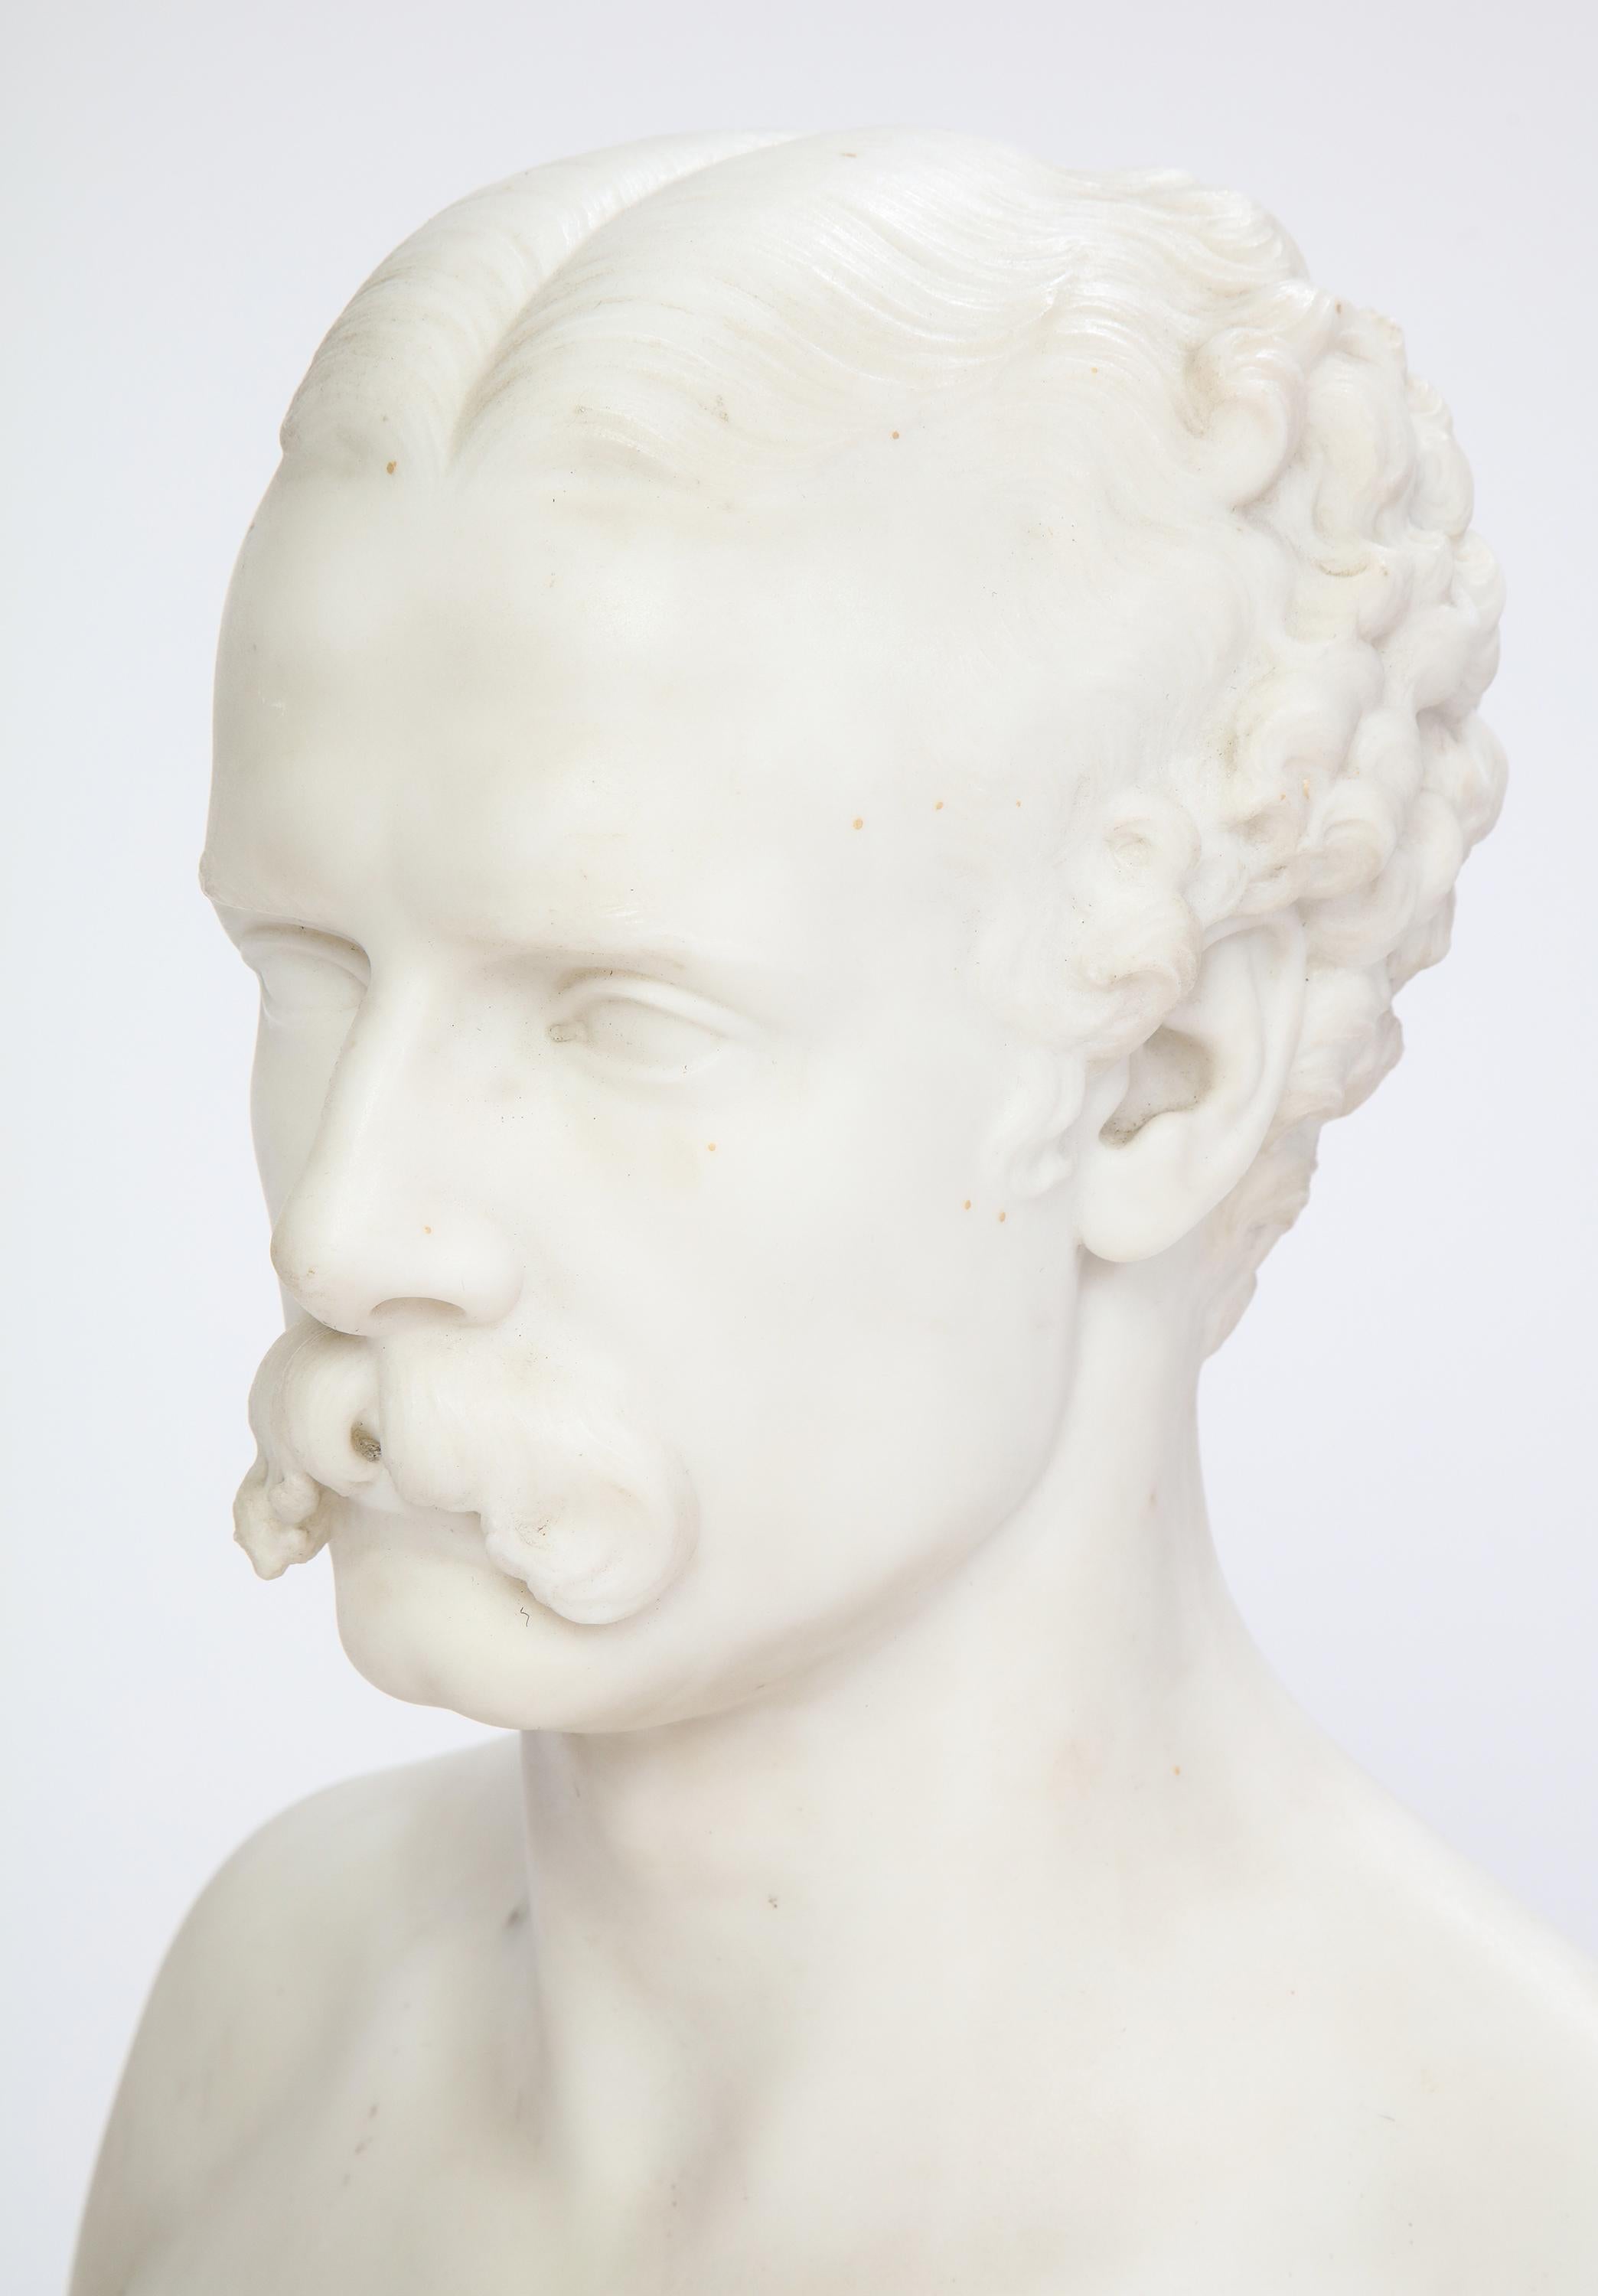 Hand-Carved White Marble Bust of a Man with a Mustache, Possibly Italian, 19th/20th Century